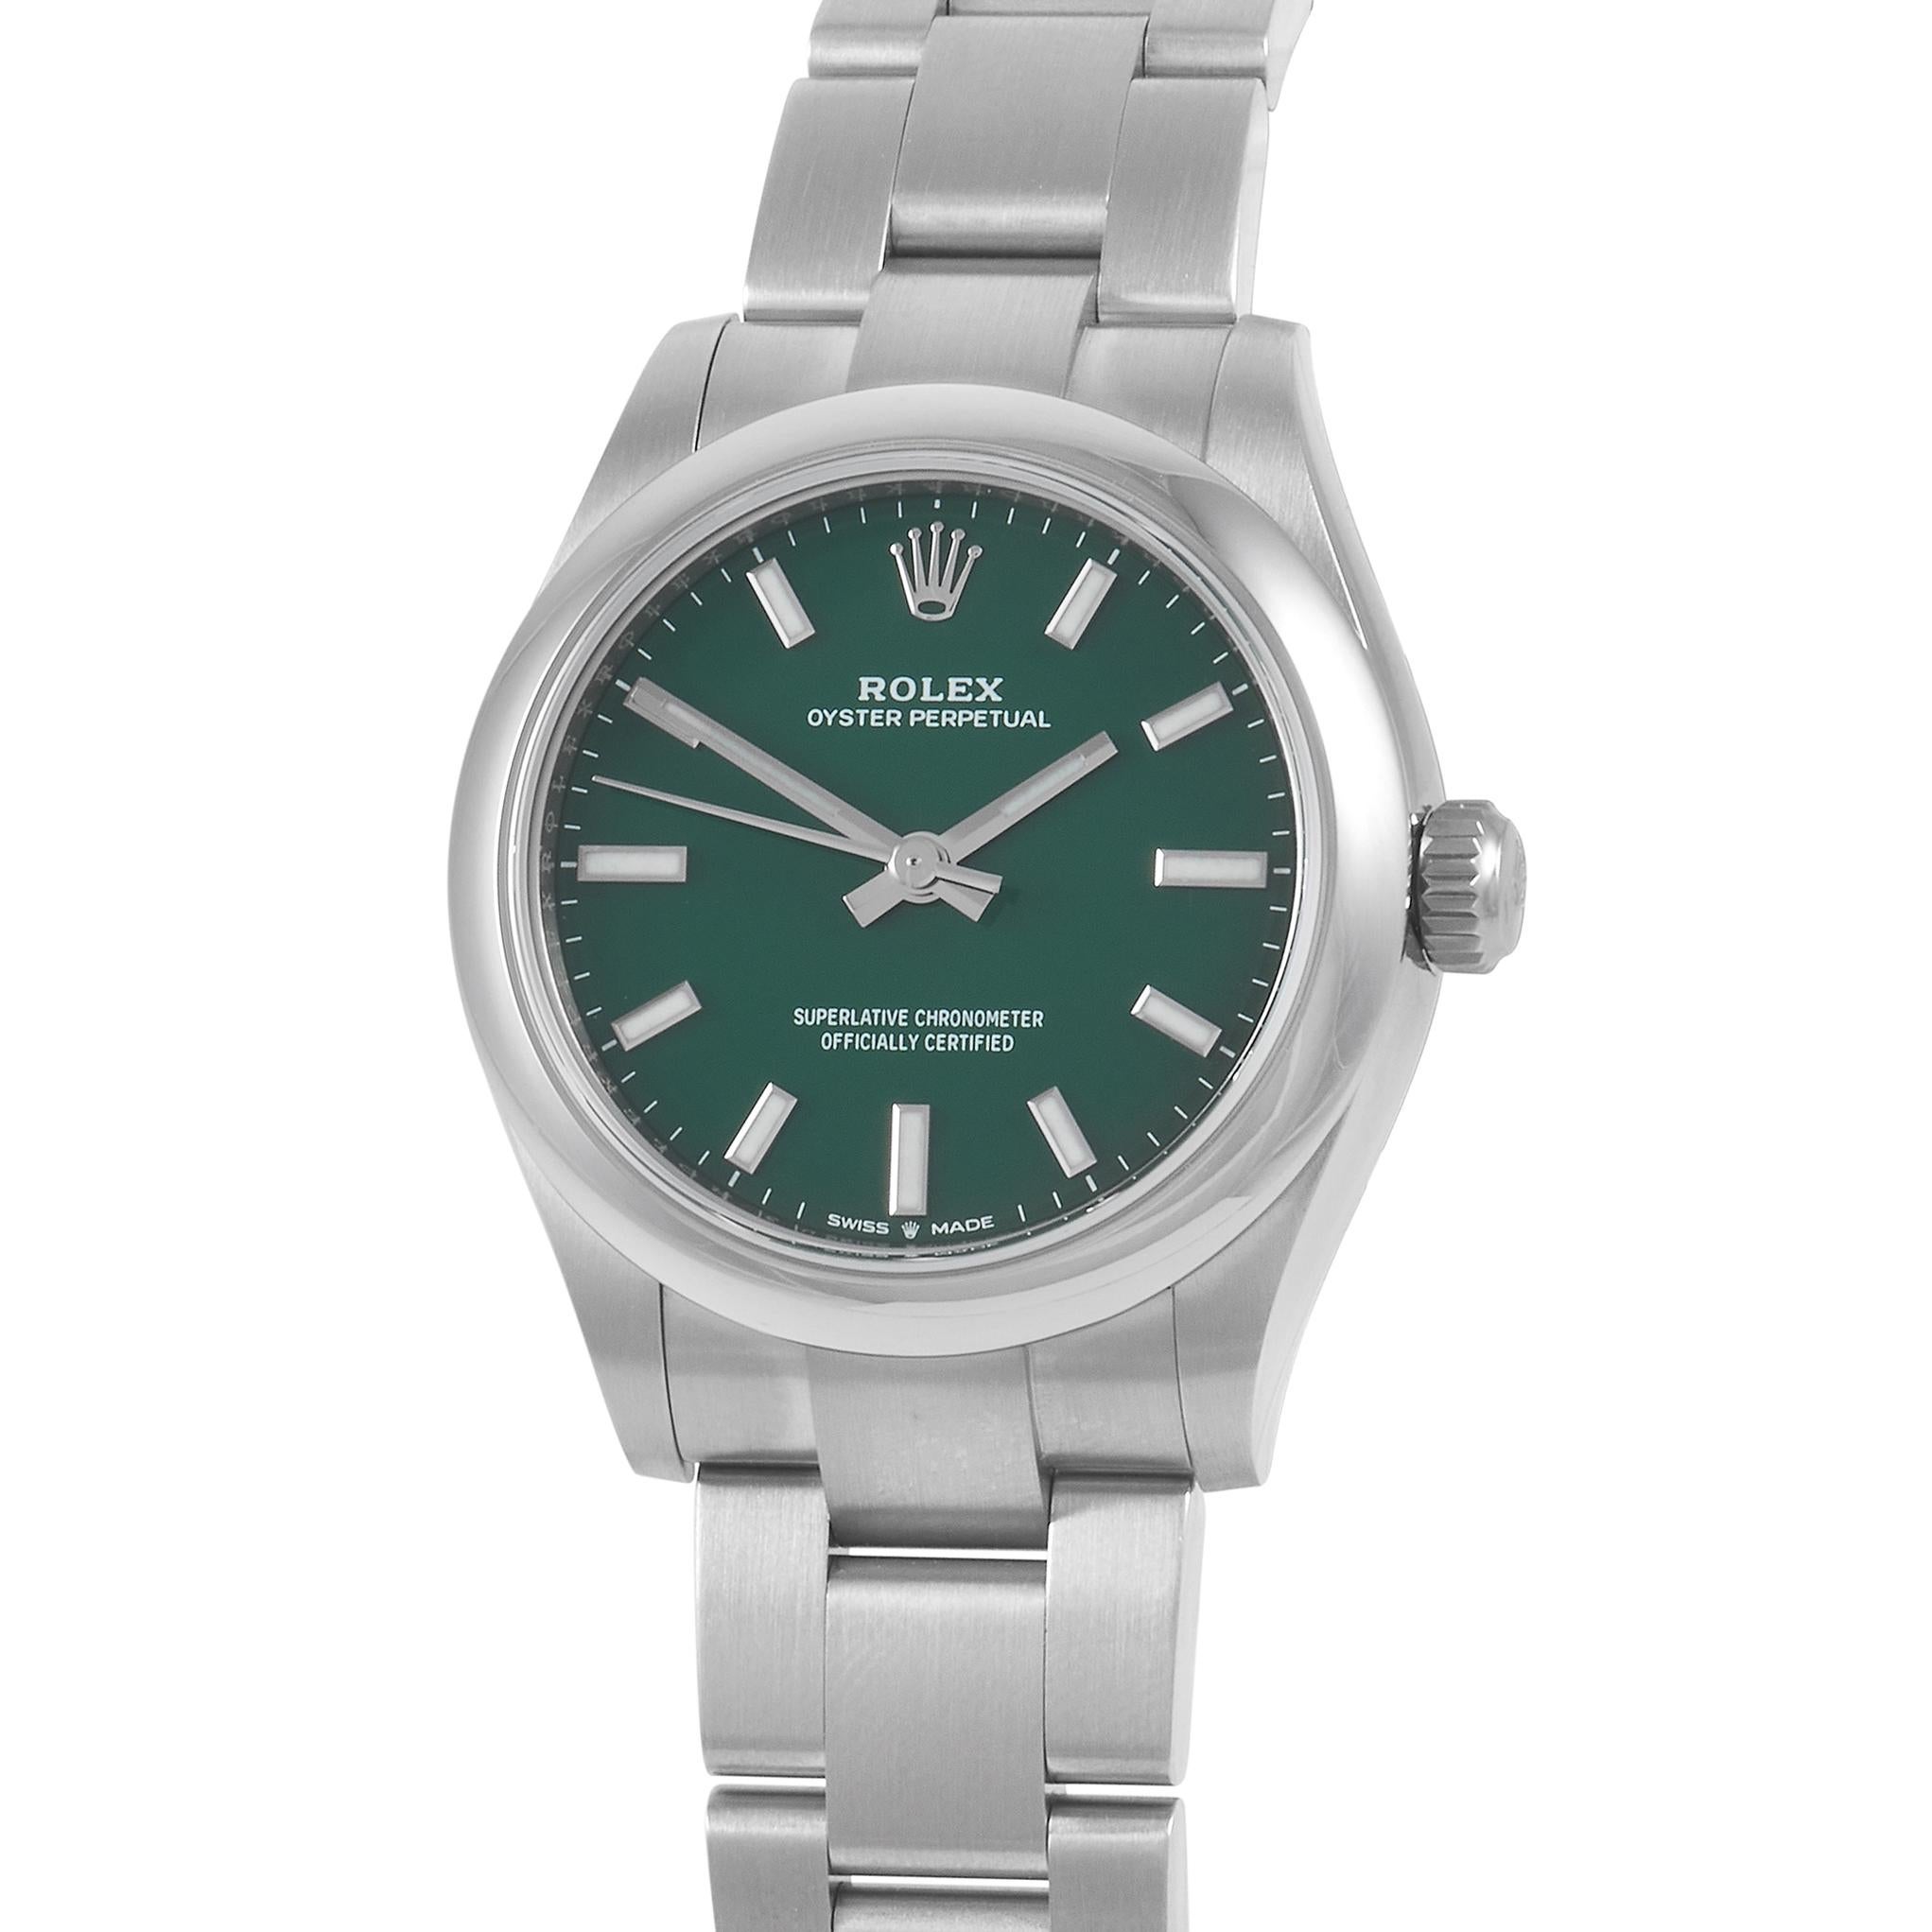 A fine lady's choice is this straightforward time-only Rolex Oyster Perpetual. It comes with a 31mm brushed steel case with polished finished sides and a smooth steel bezel. Adding a hint of character to the watch is a deep green dial with